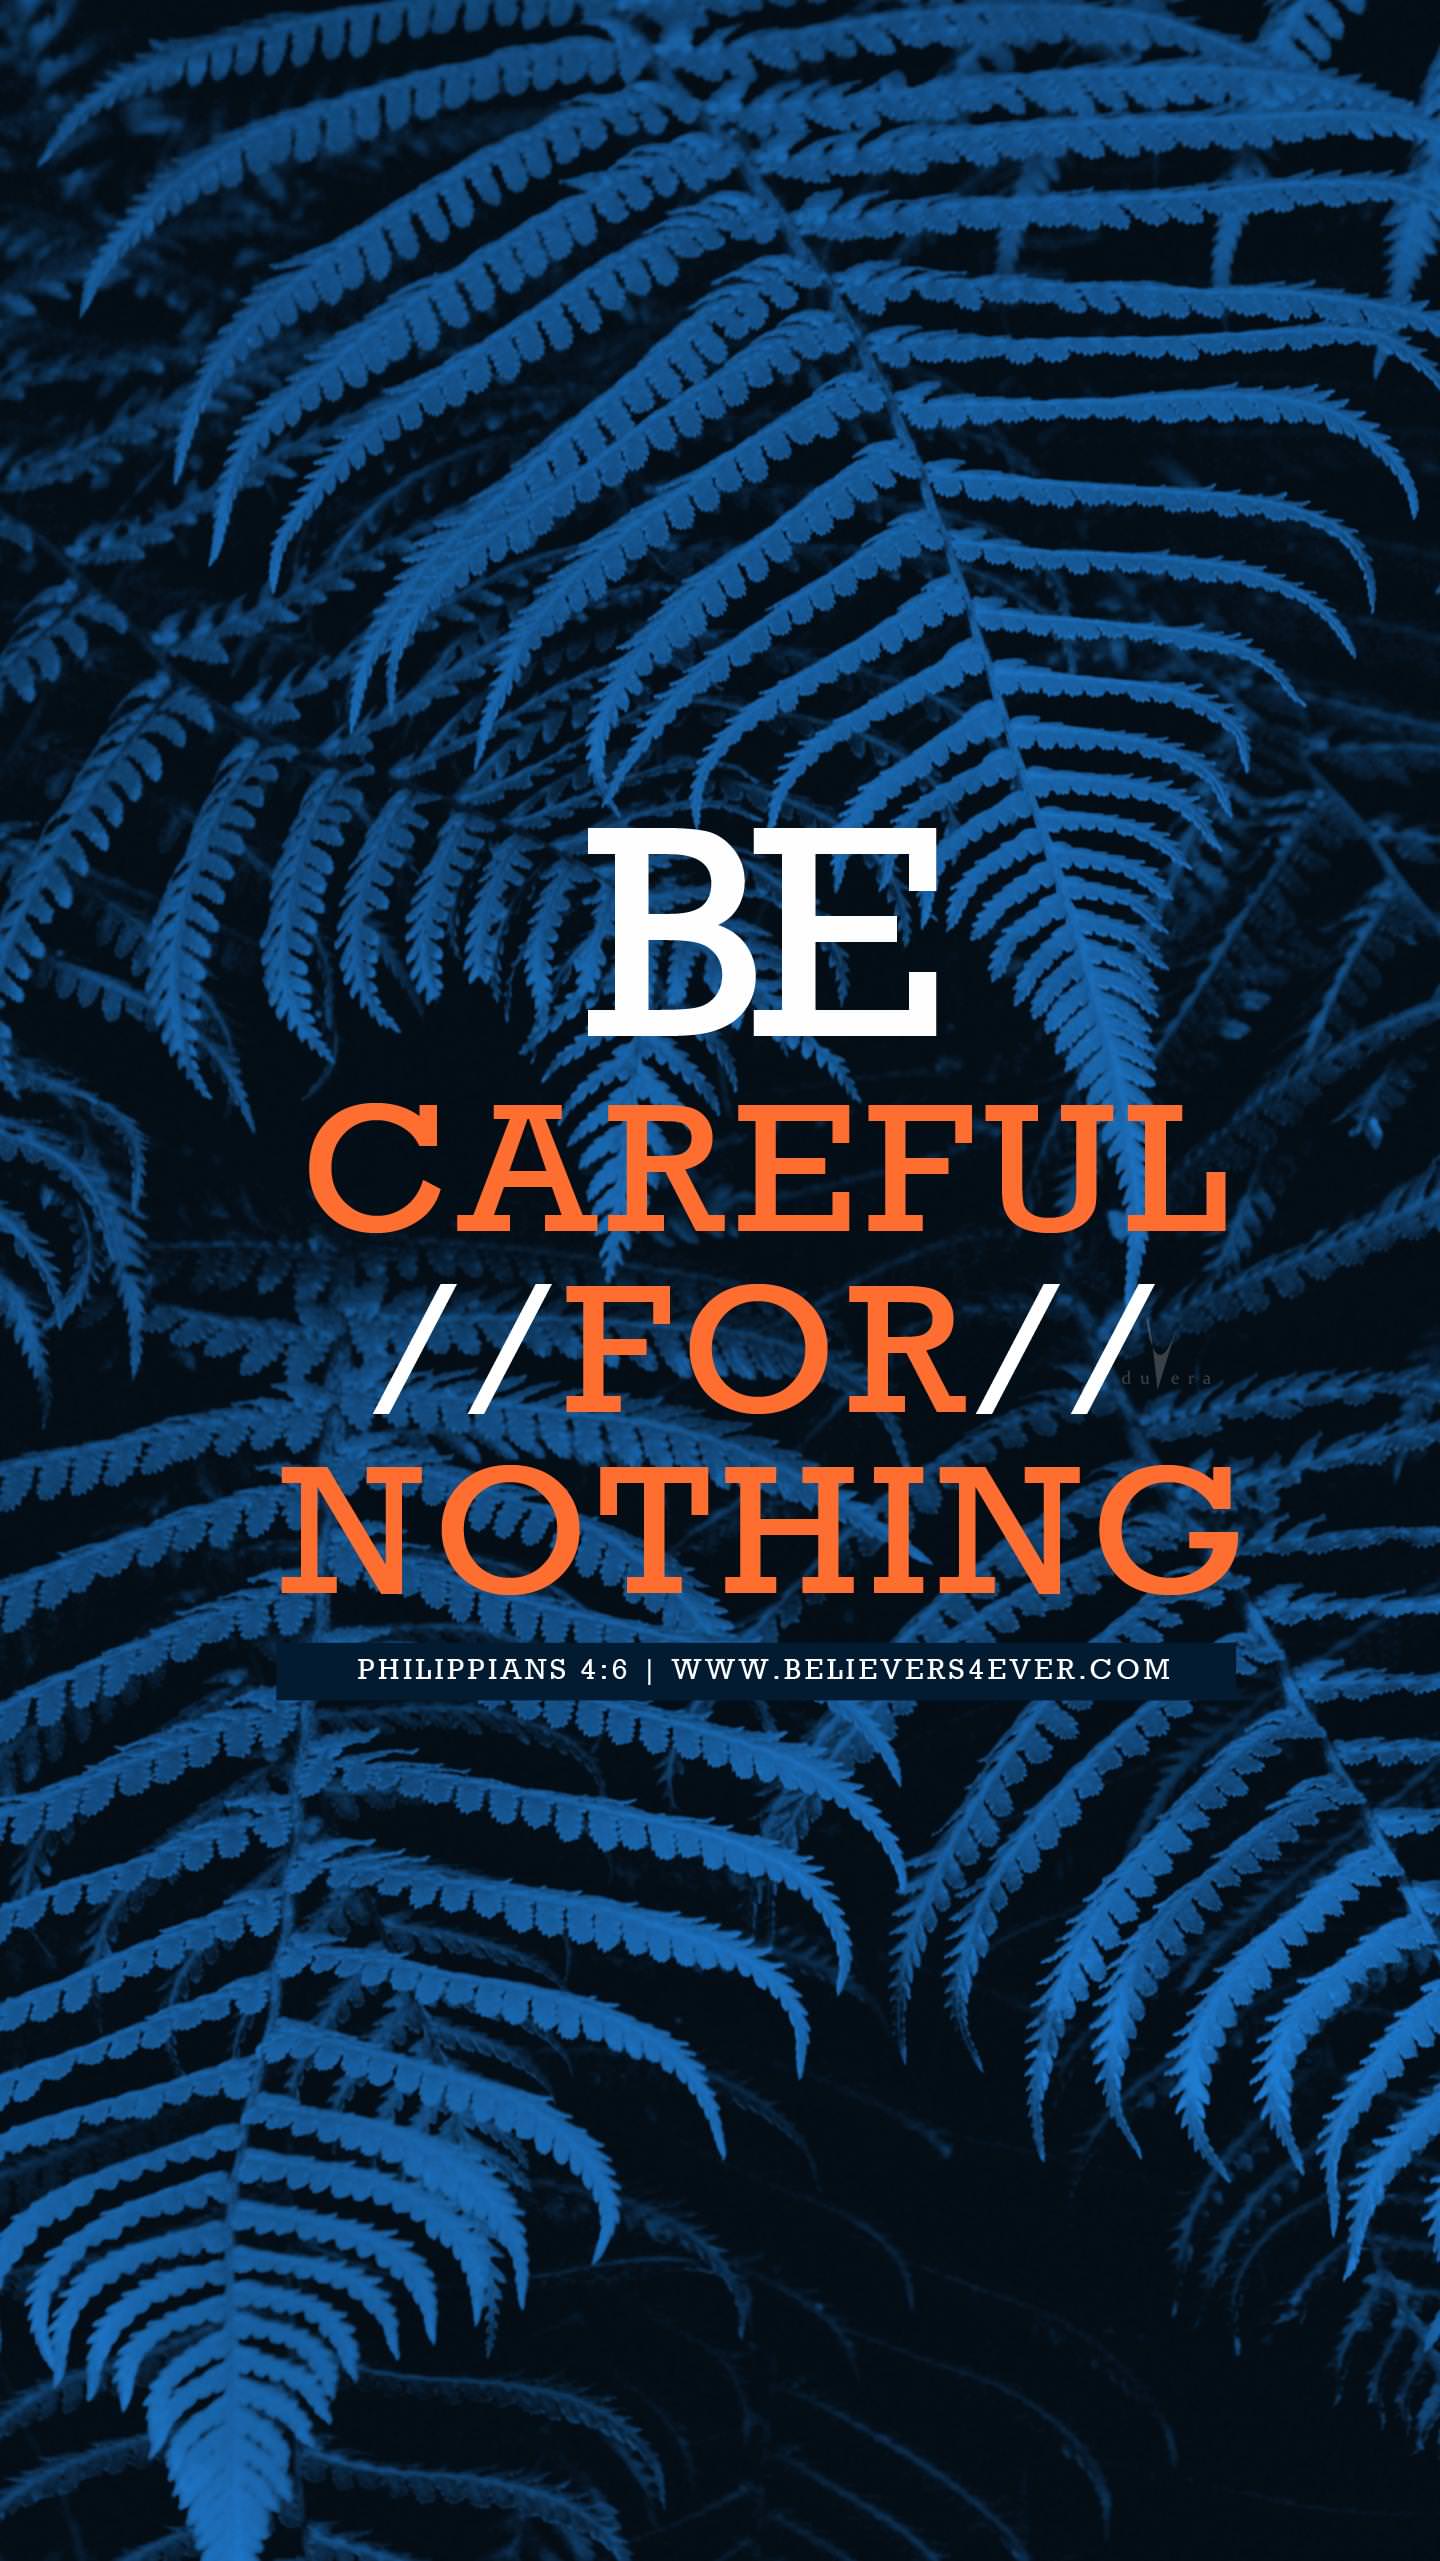 Be careful for nothing